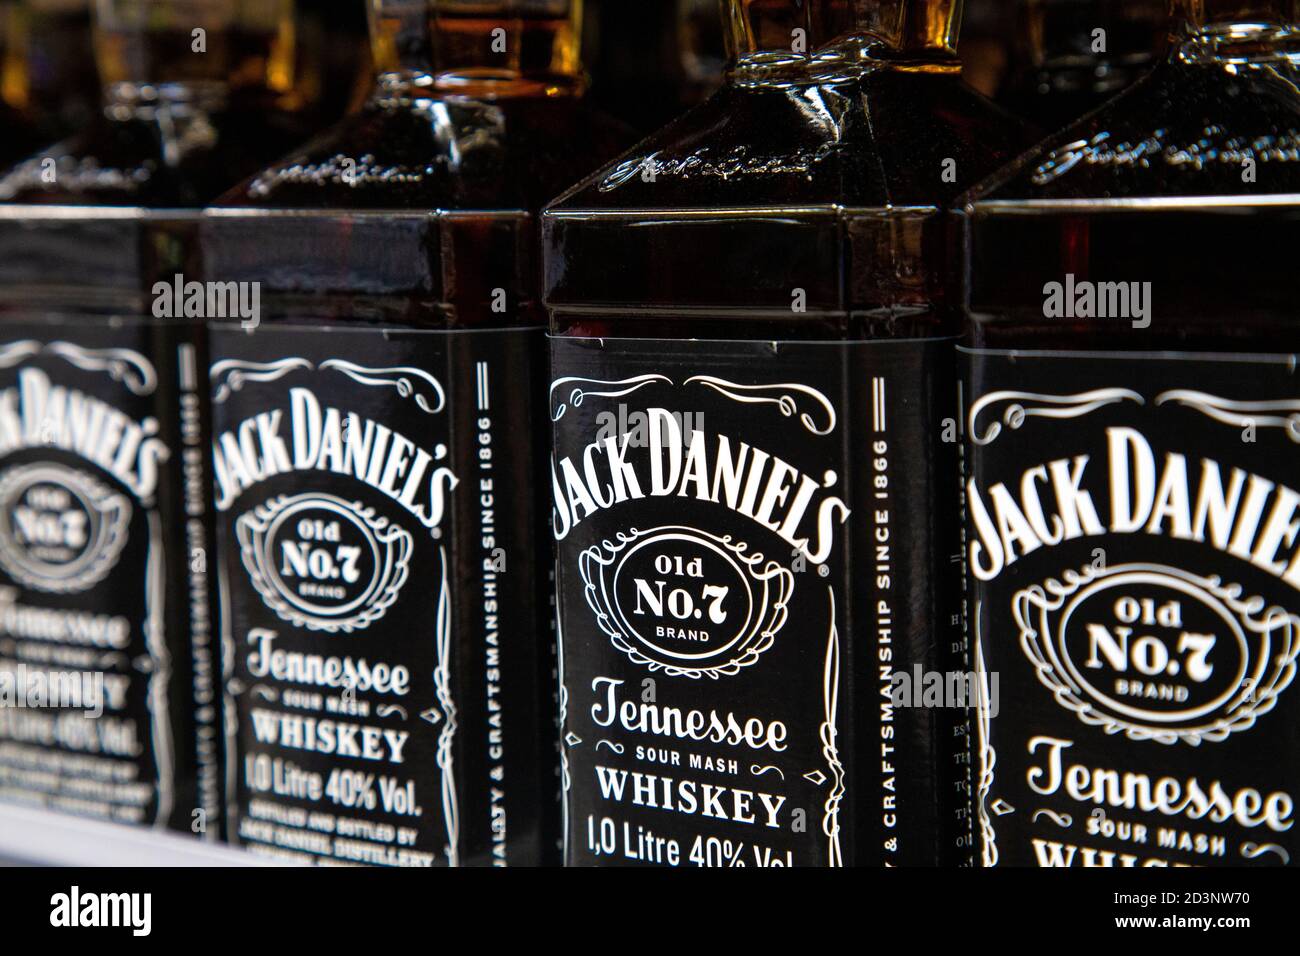 Bottles of Jack Daniels No. 7 Tennessee Whiskey at a supermarket Stock Photo